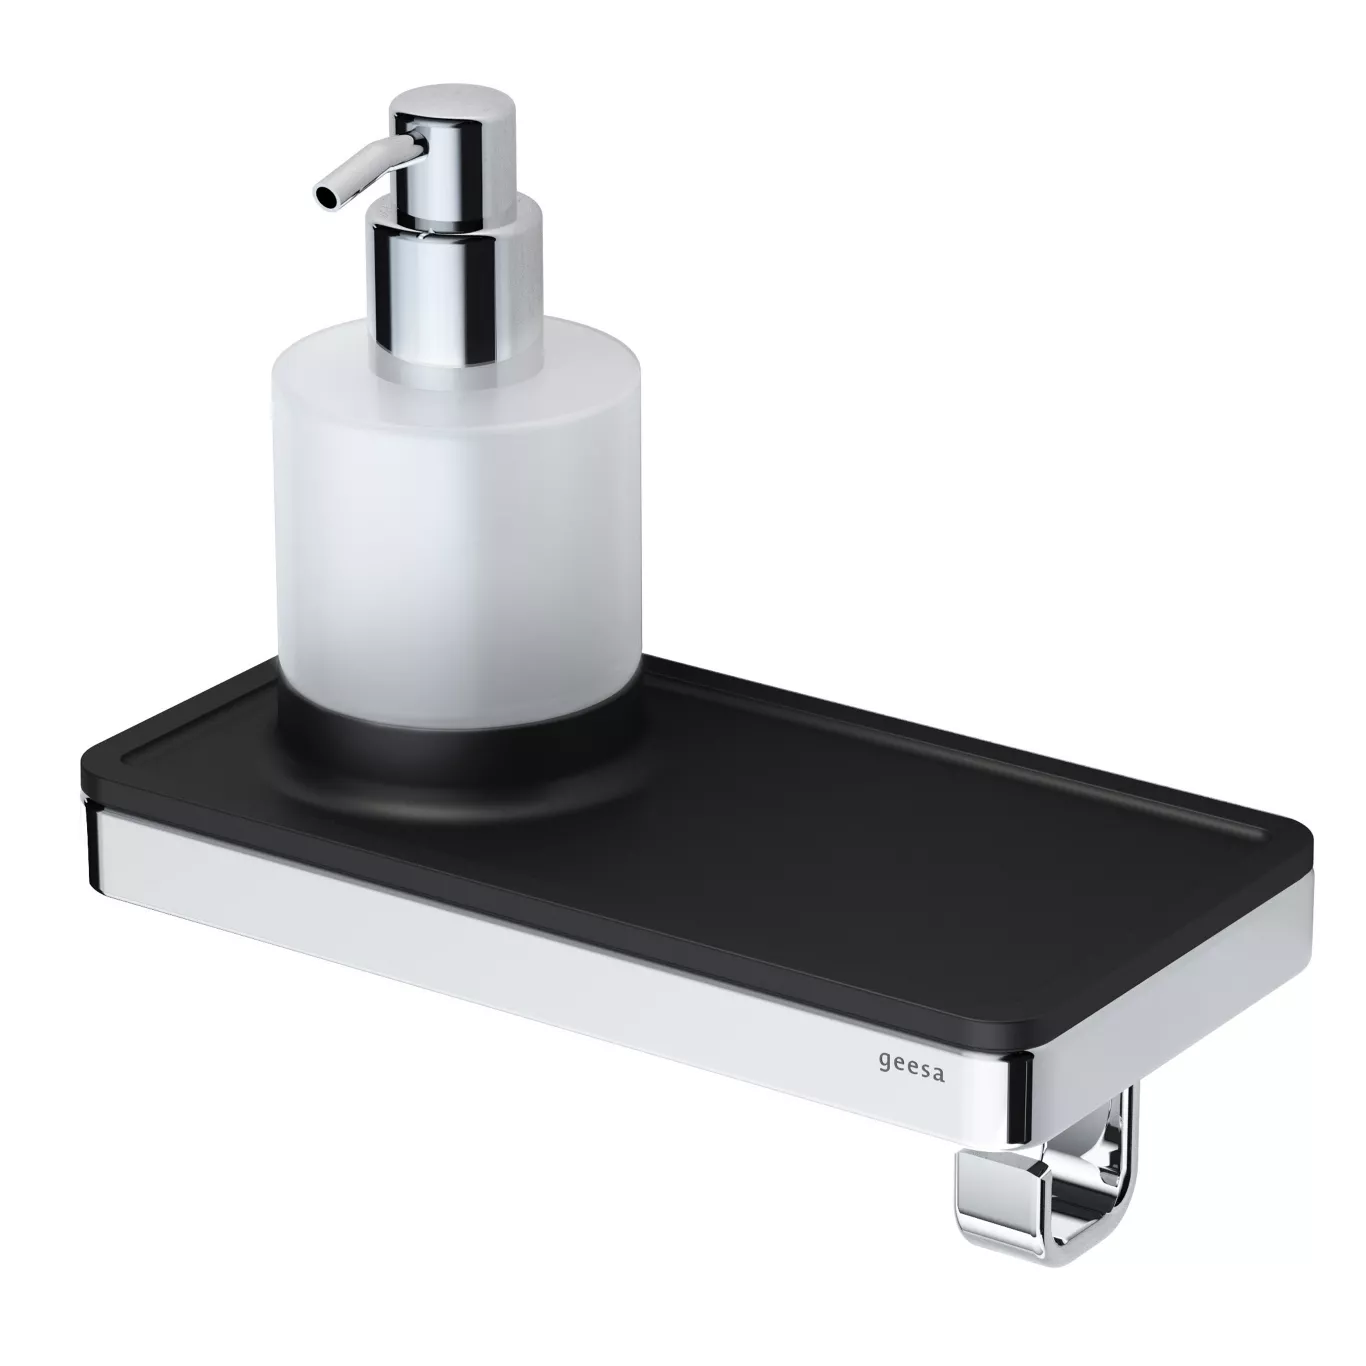 A soap dispenser and stand from the Geesa Range